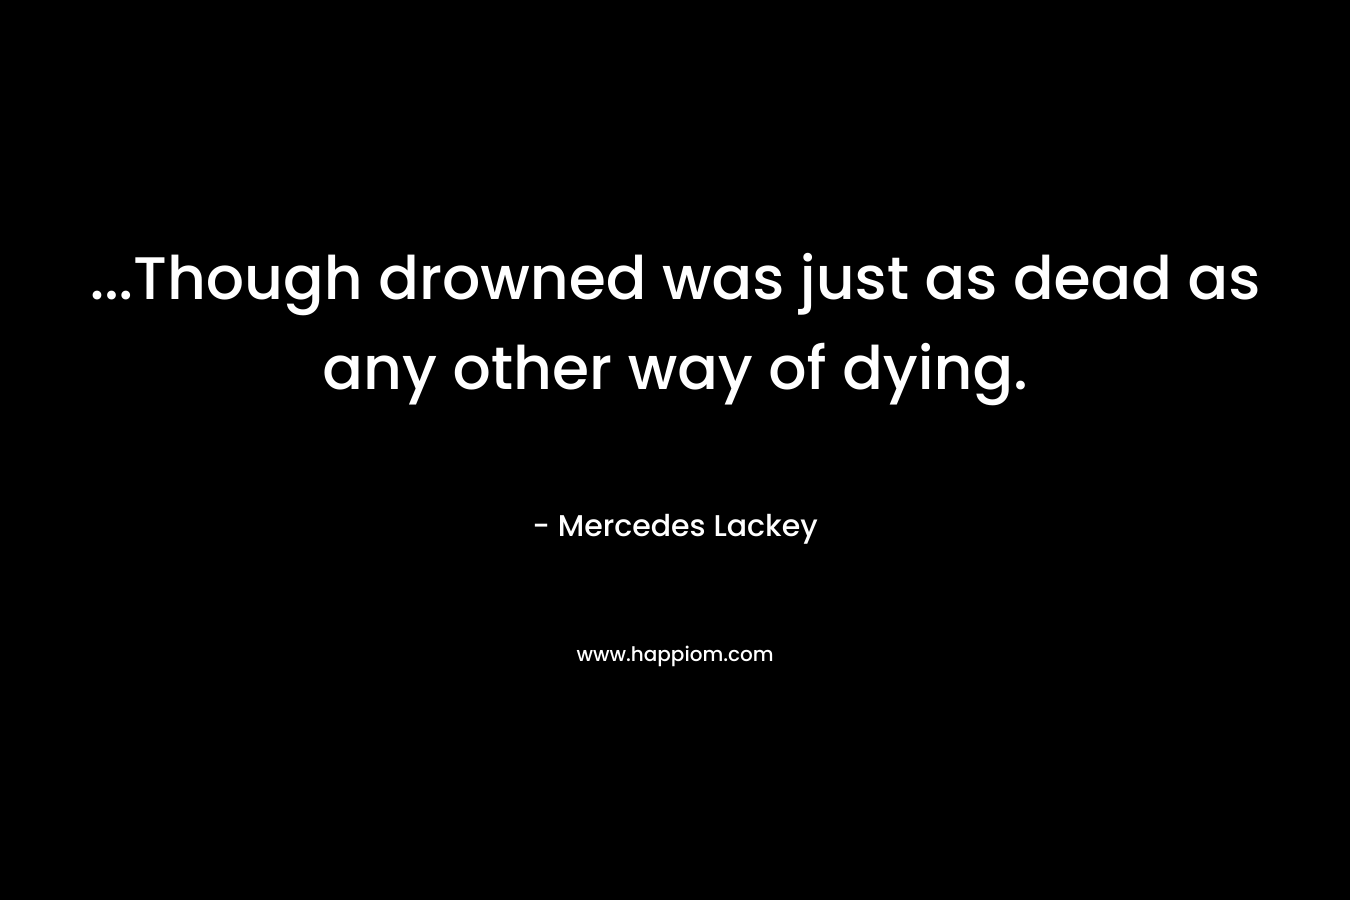 ...Though drowned was just as dead as any other way of dying.